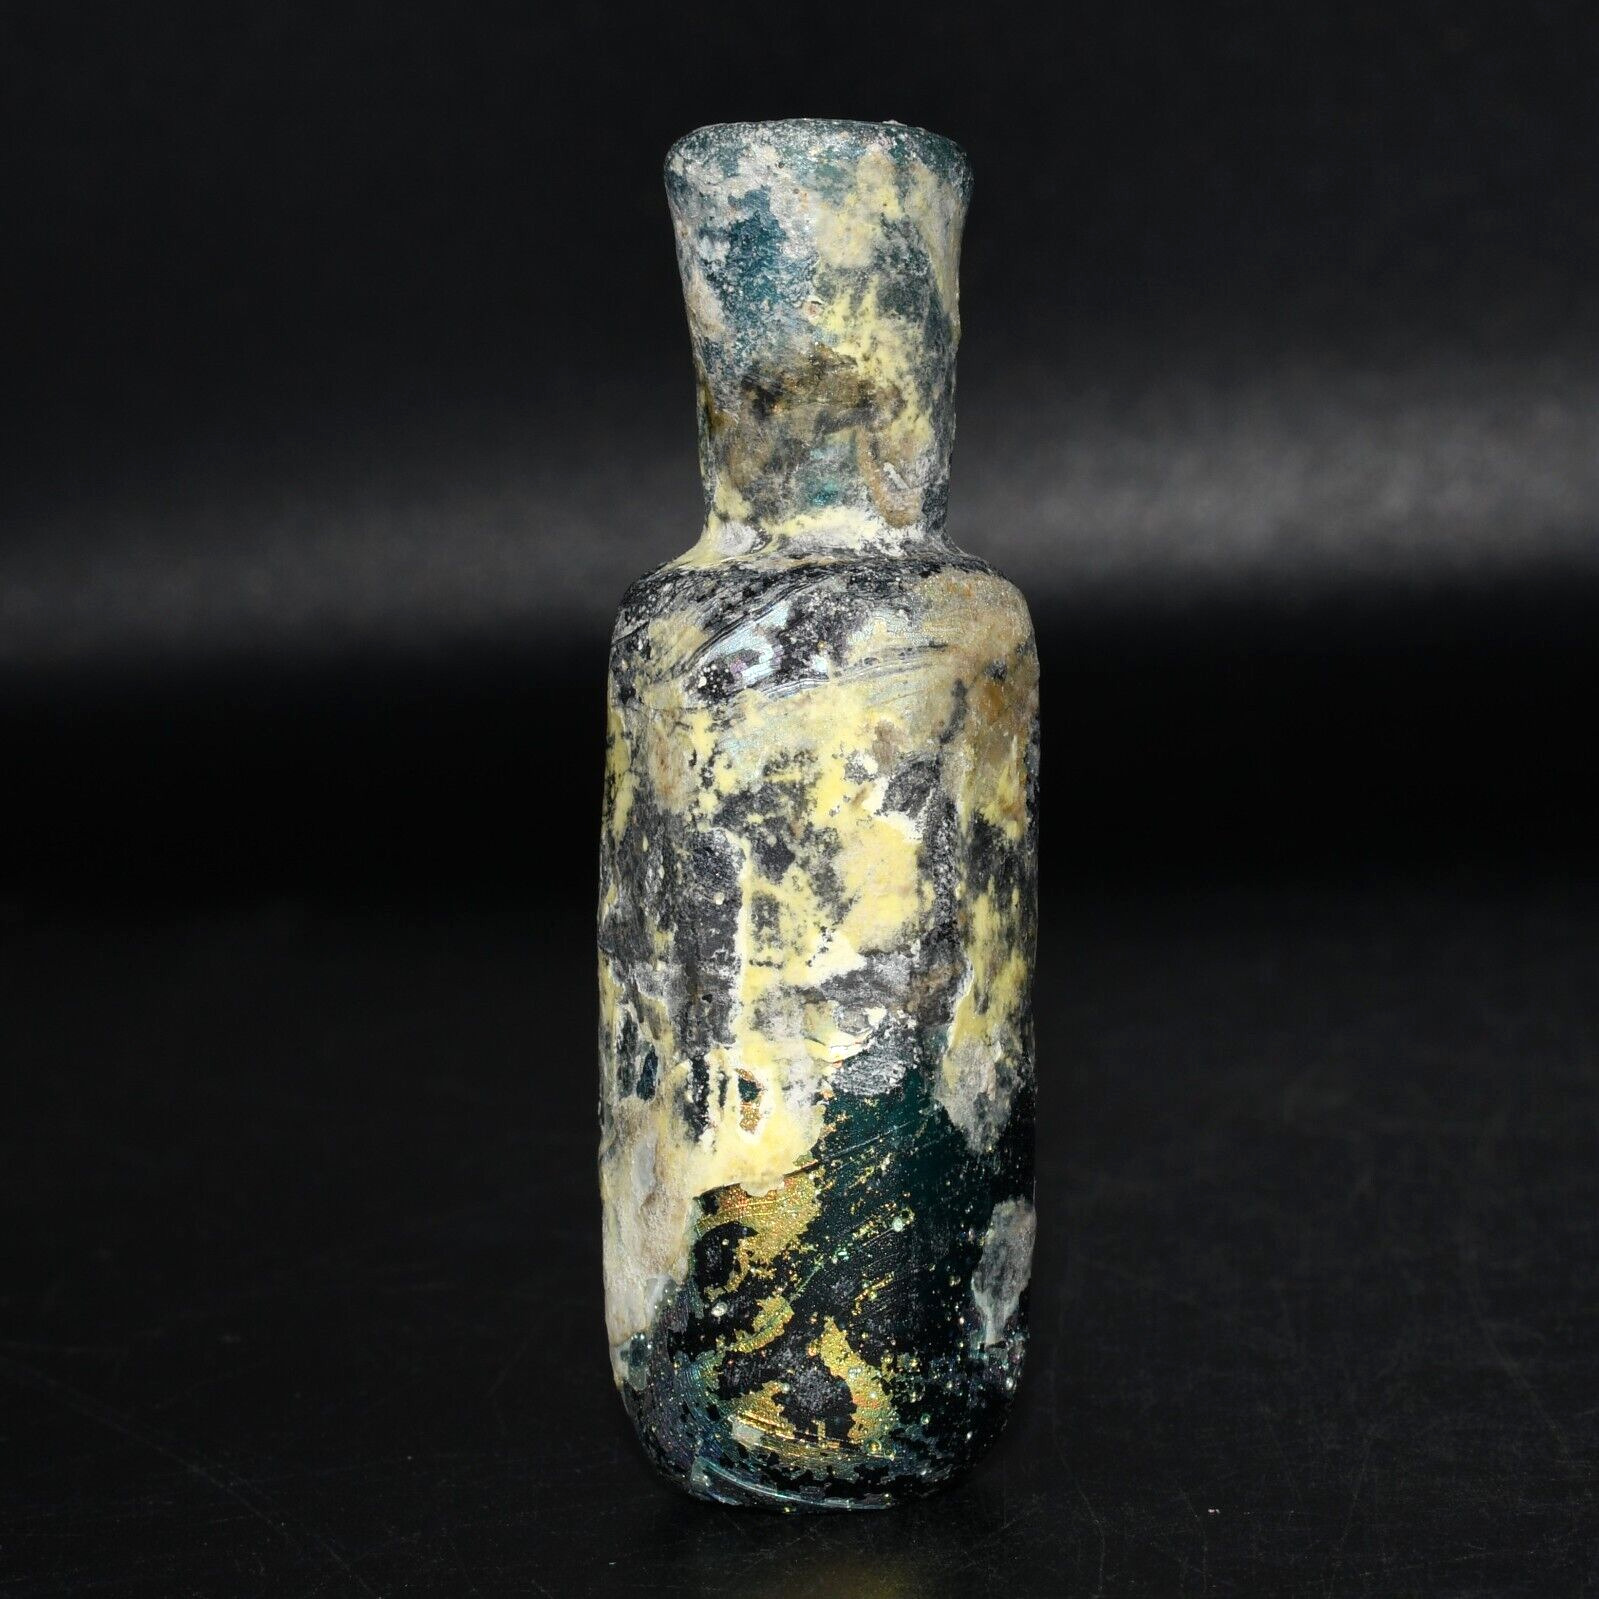 Authentic Ancient Roman Glass Bottle With Golden Patina Ca. 1st - 2nd Century AD